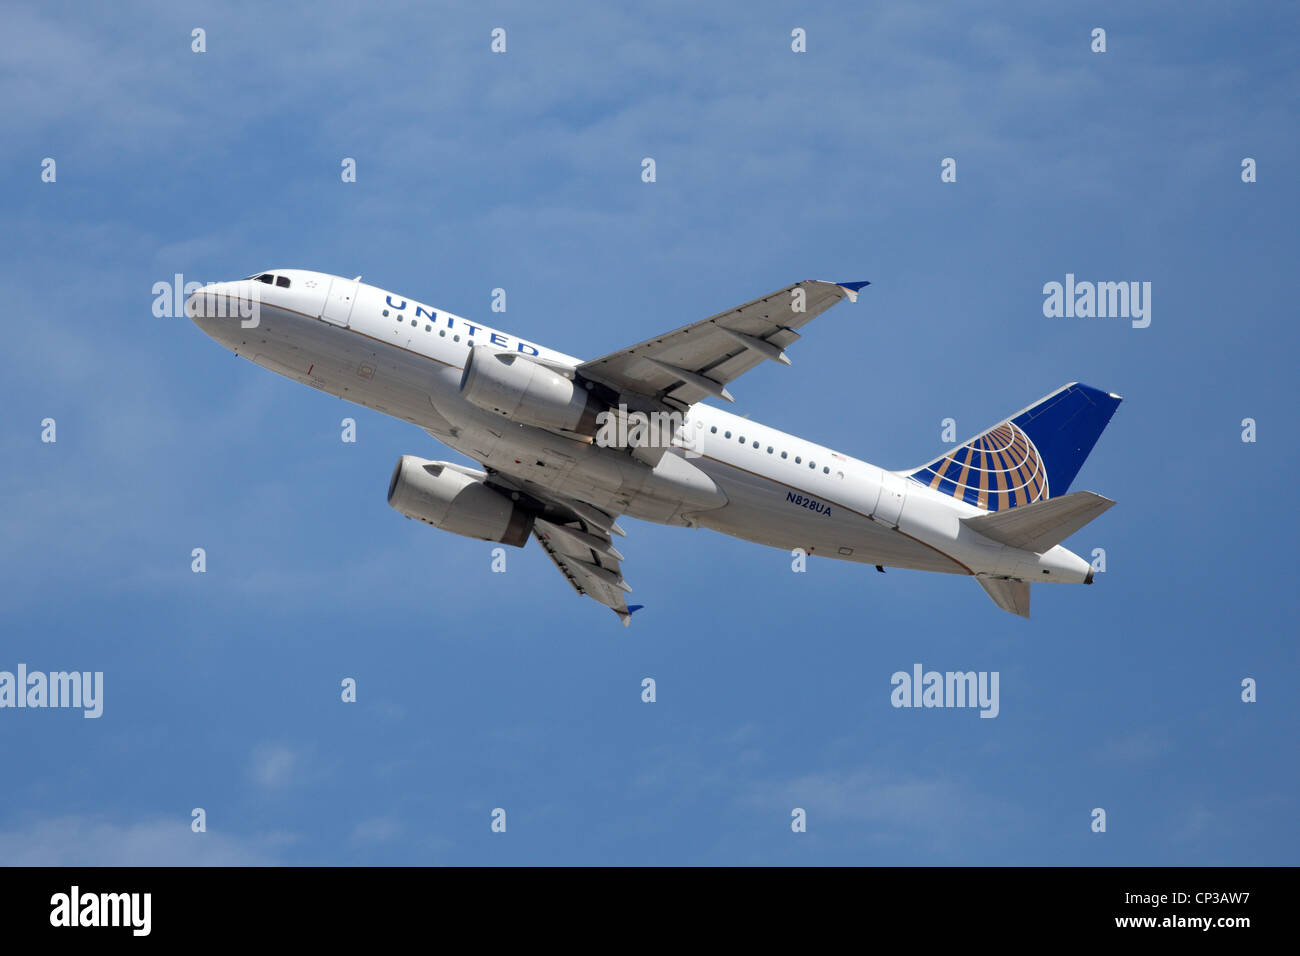 A United Airlines Airbus A319 takes off from Los Angeles Airport on April 24, 2012. The A319 is a shortened version of the A320 Stock Photo